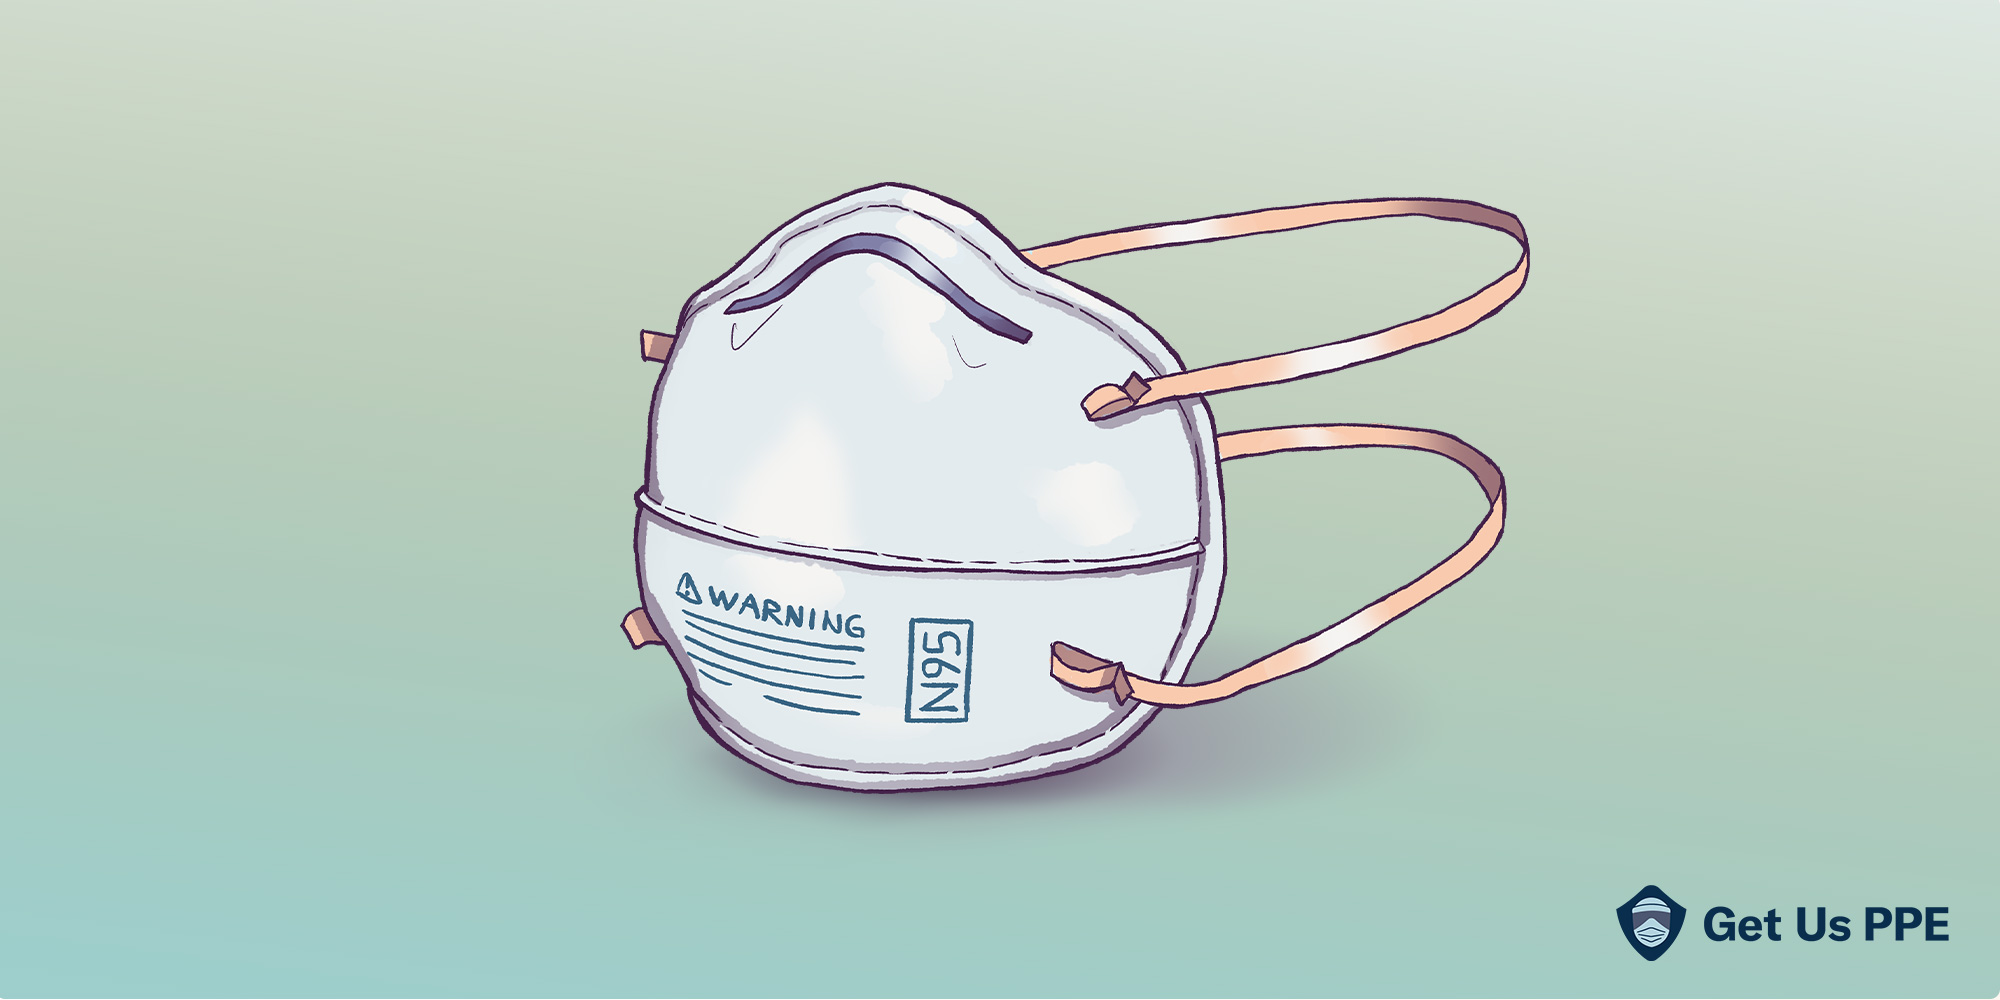 How The N95 Masks Shortage Evolved To A Supply-Demand Disconnect